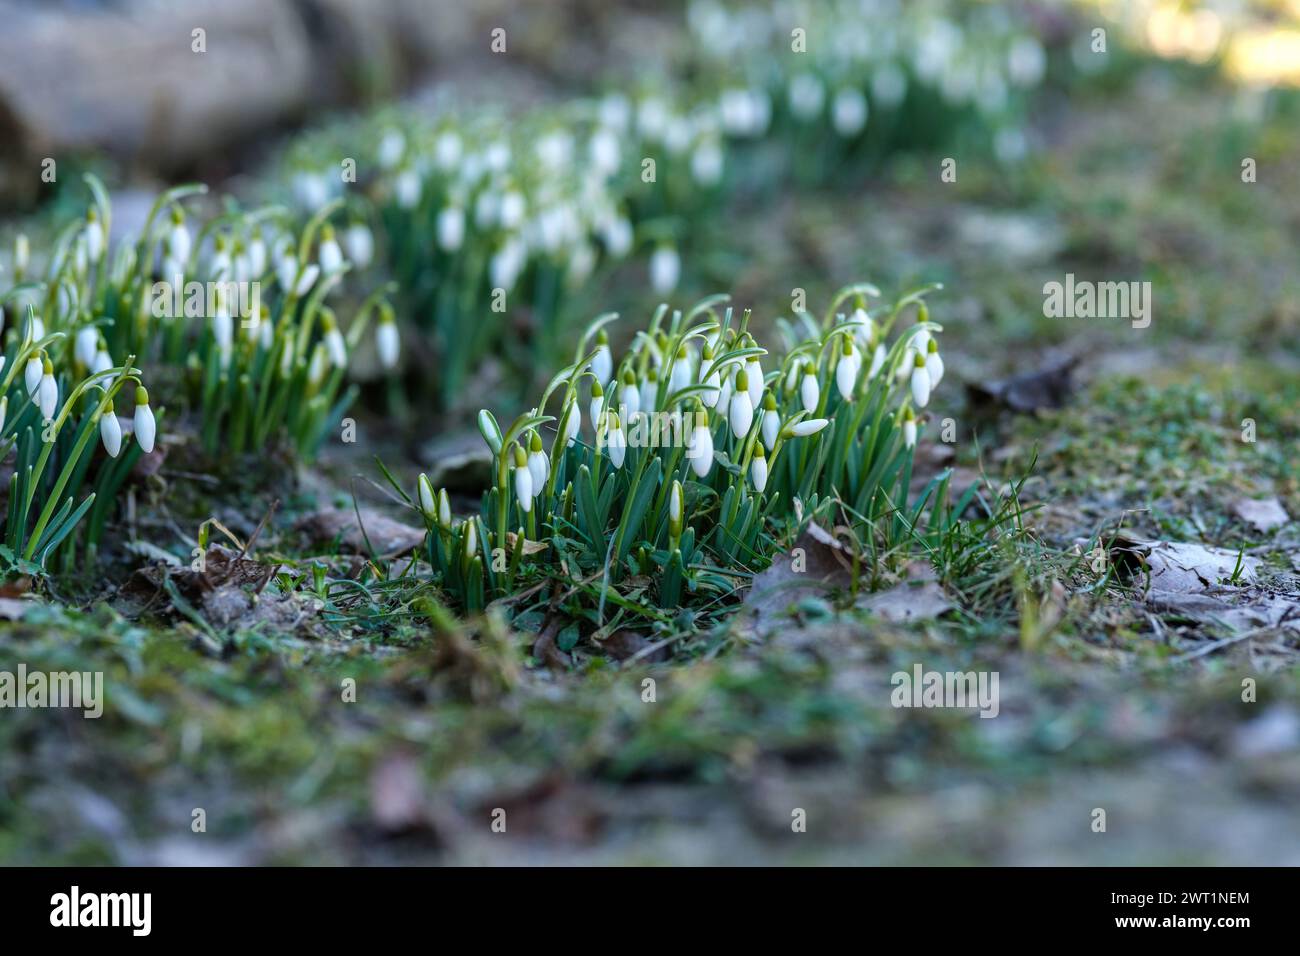 Latvia's woodlands come to life with the arrival of snowdrops, a sight of pure beauty Stock Photo